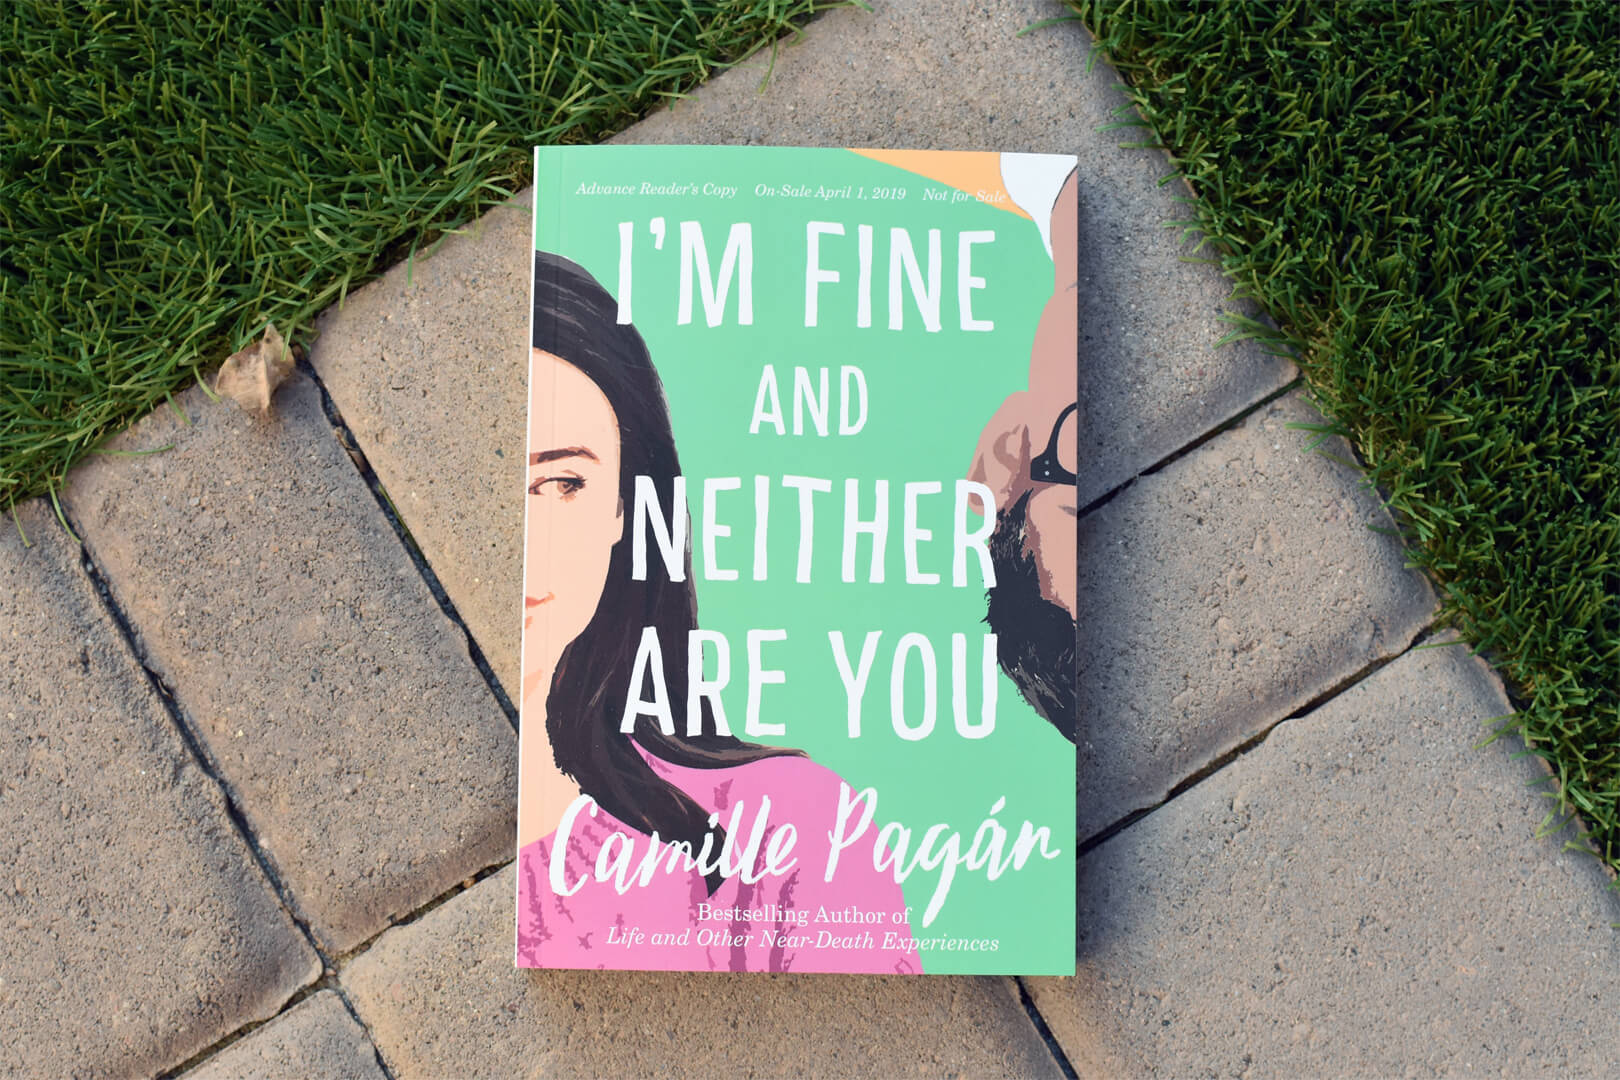 Book Club Questions for I’m Fine and Neither Are You by Camille Pagán